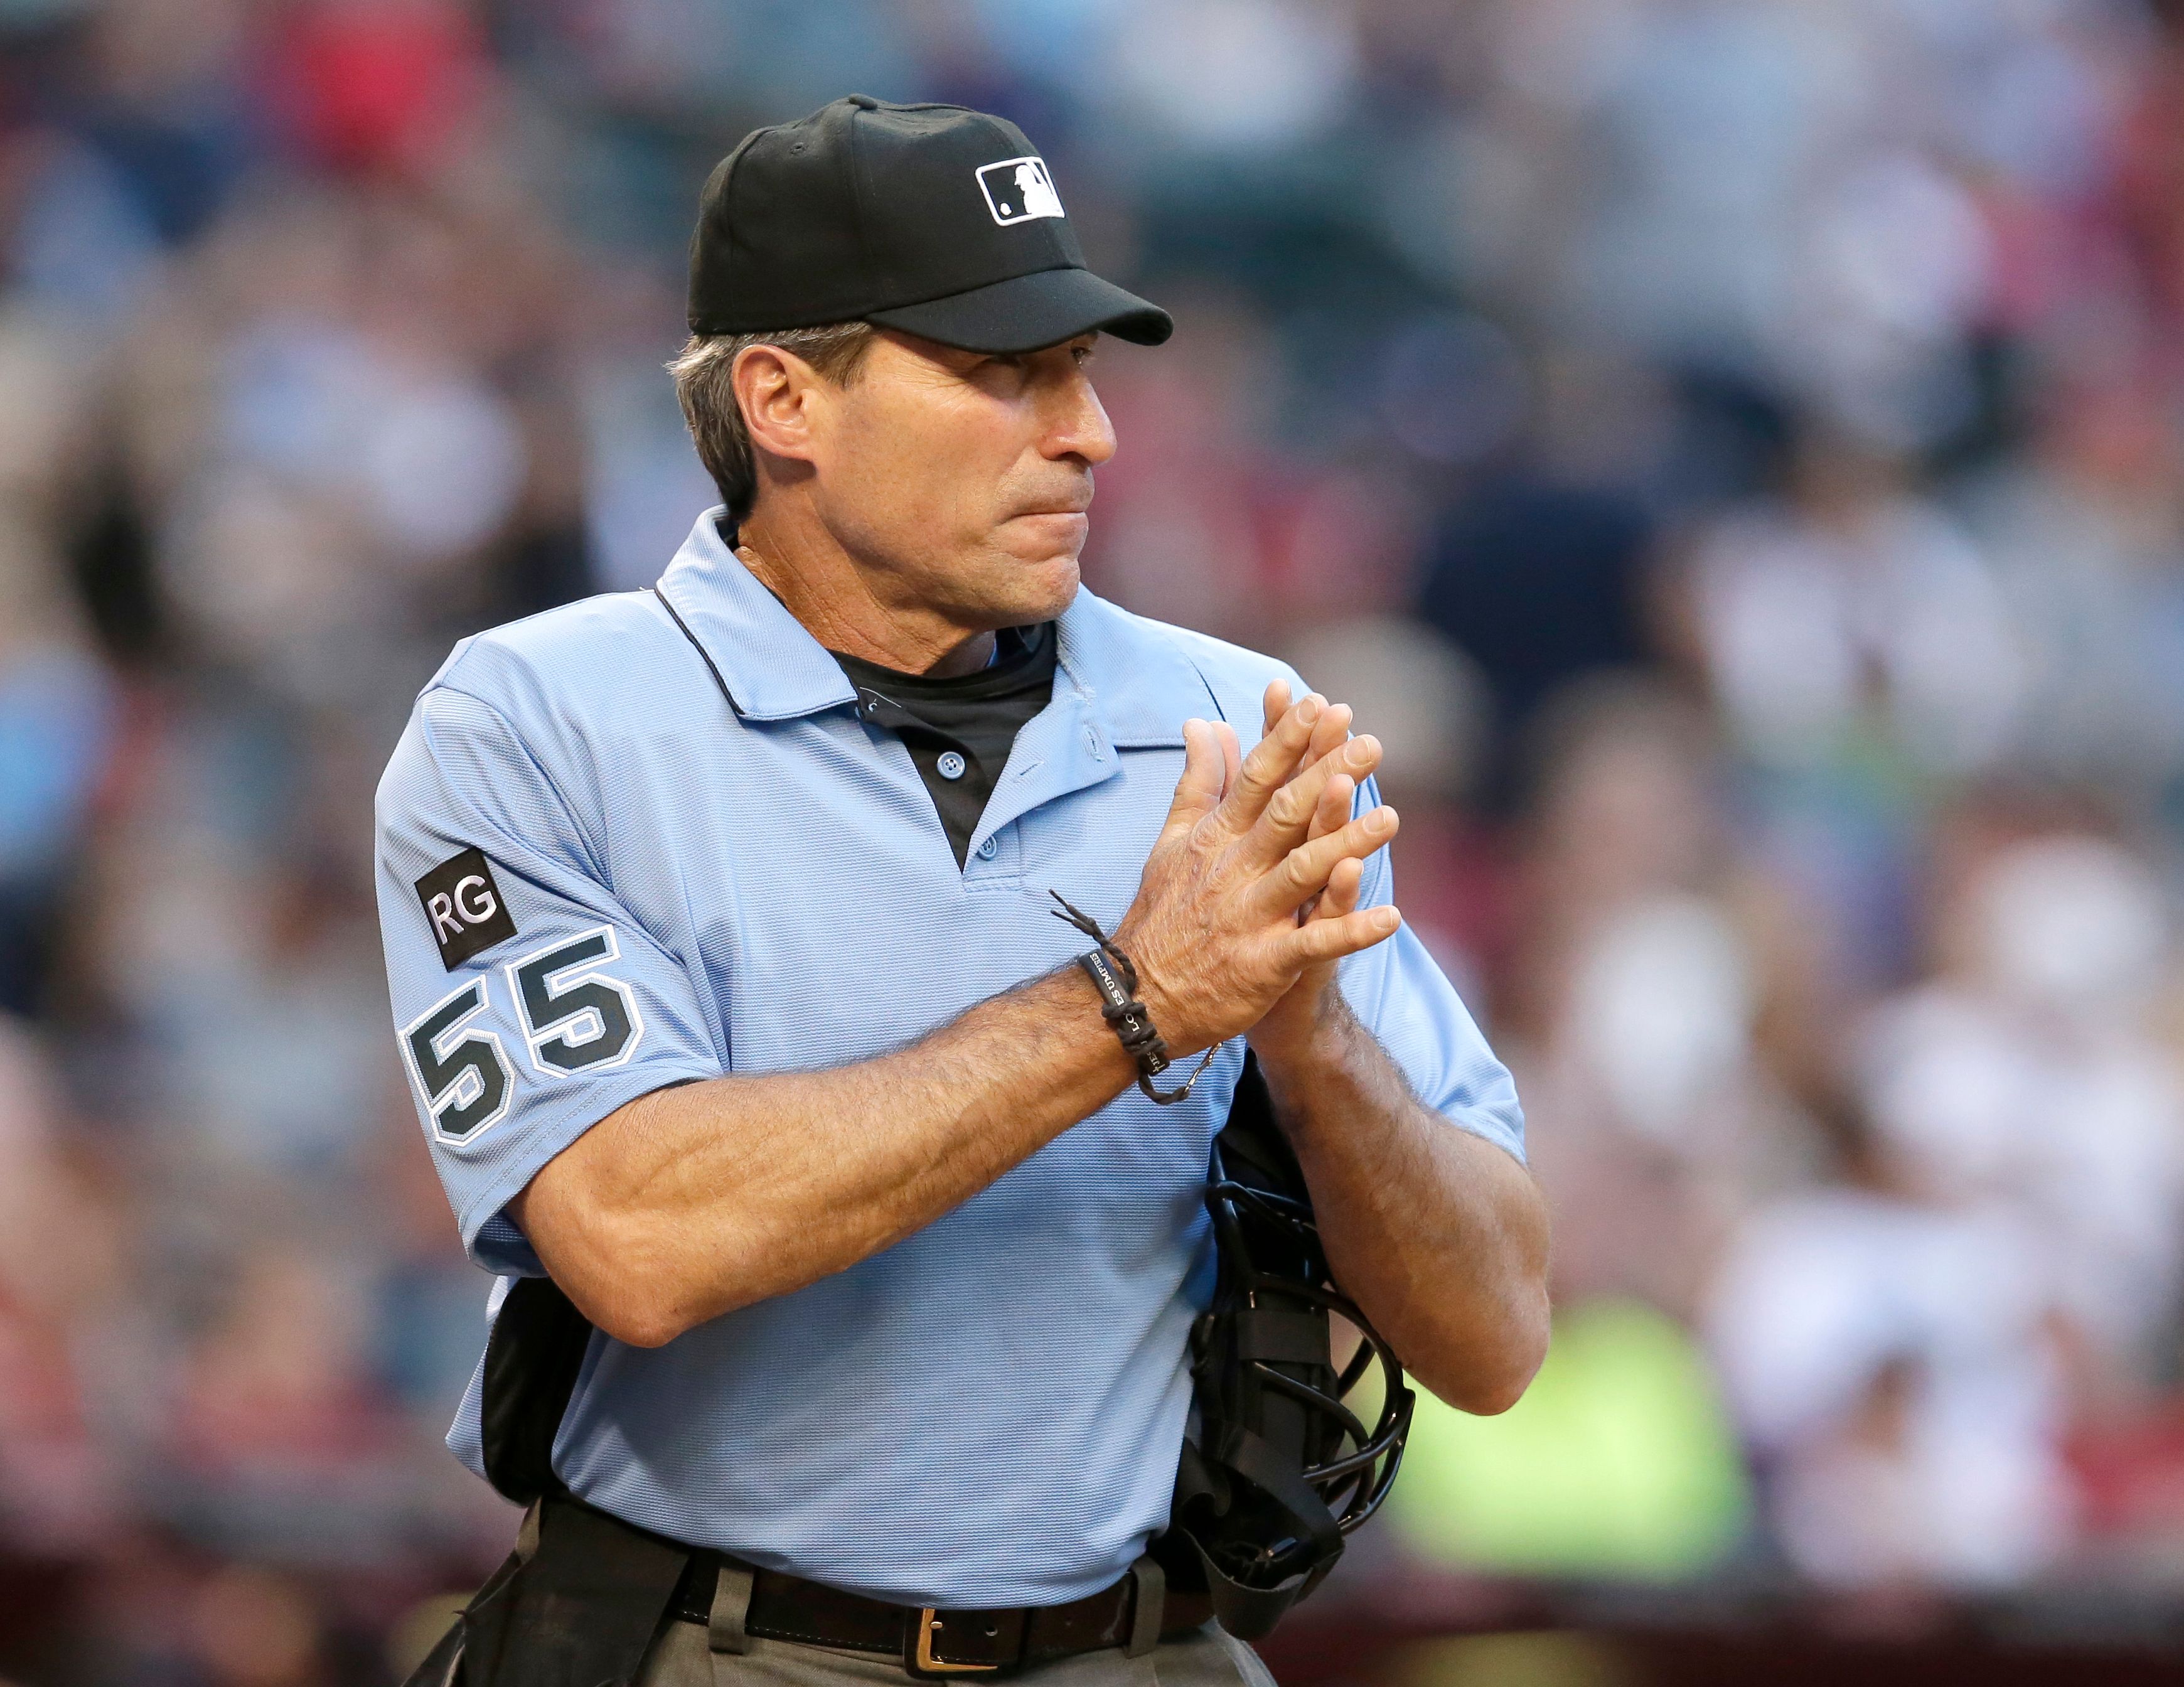 MLB 5 changes wed love to see from umpires in 2022